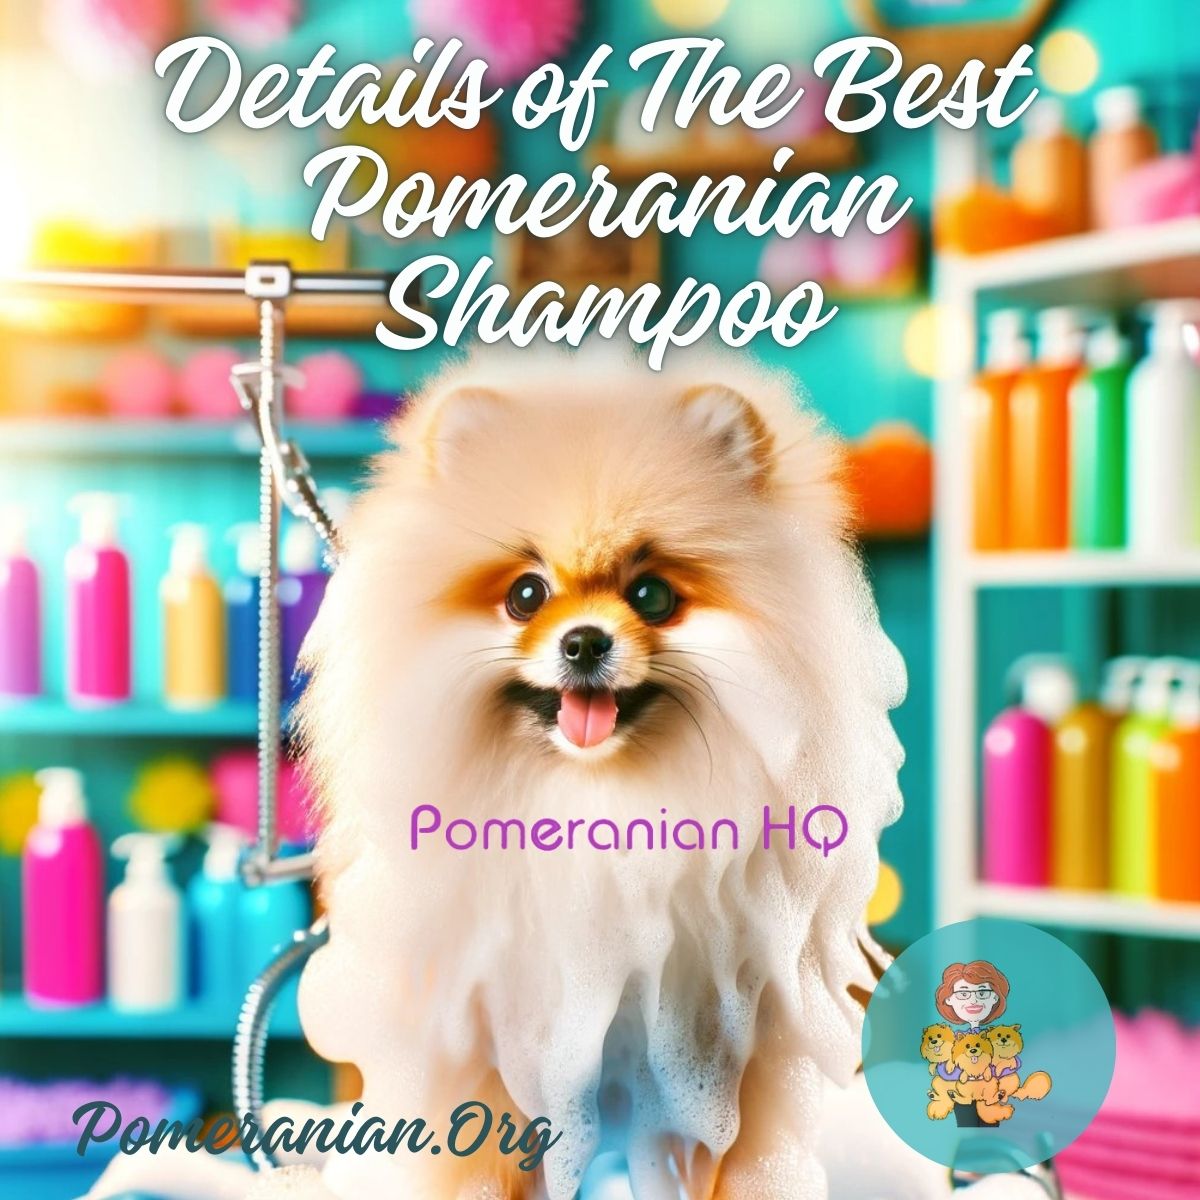 Details of The Best Shampoo for Pomeranian Dogs